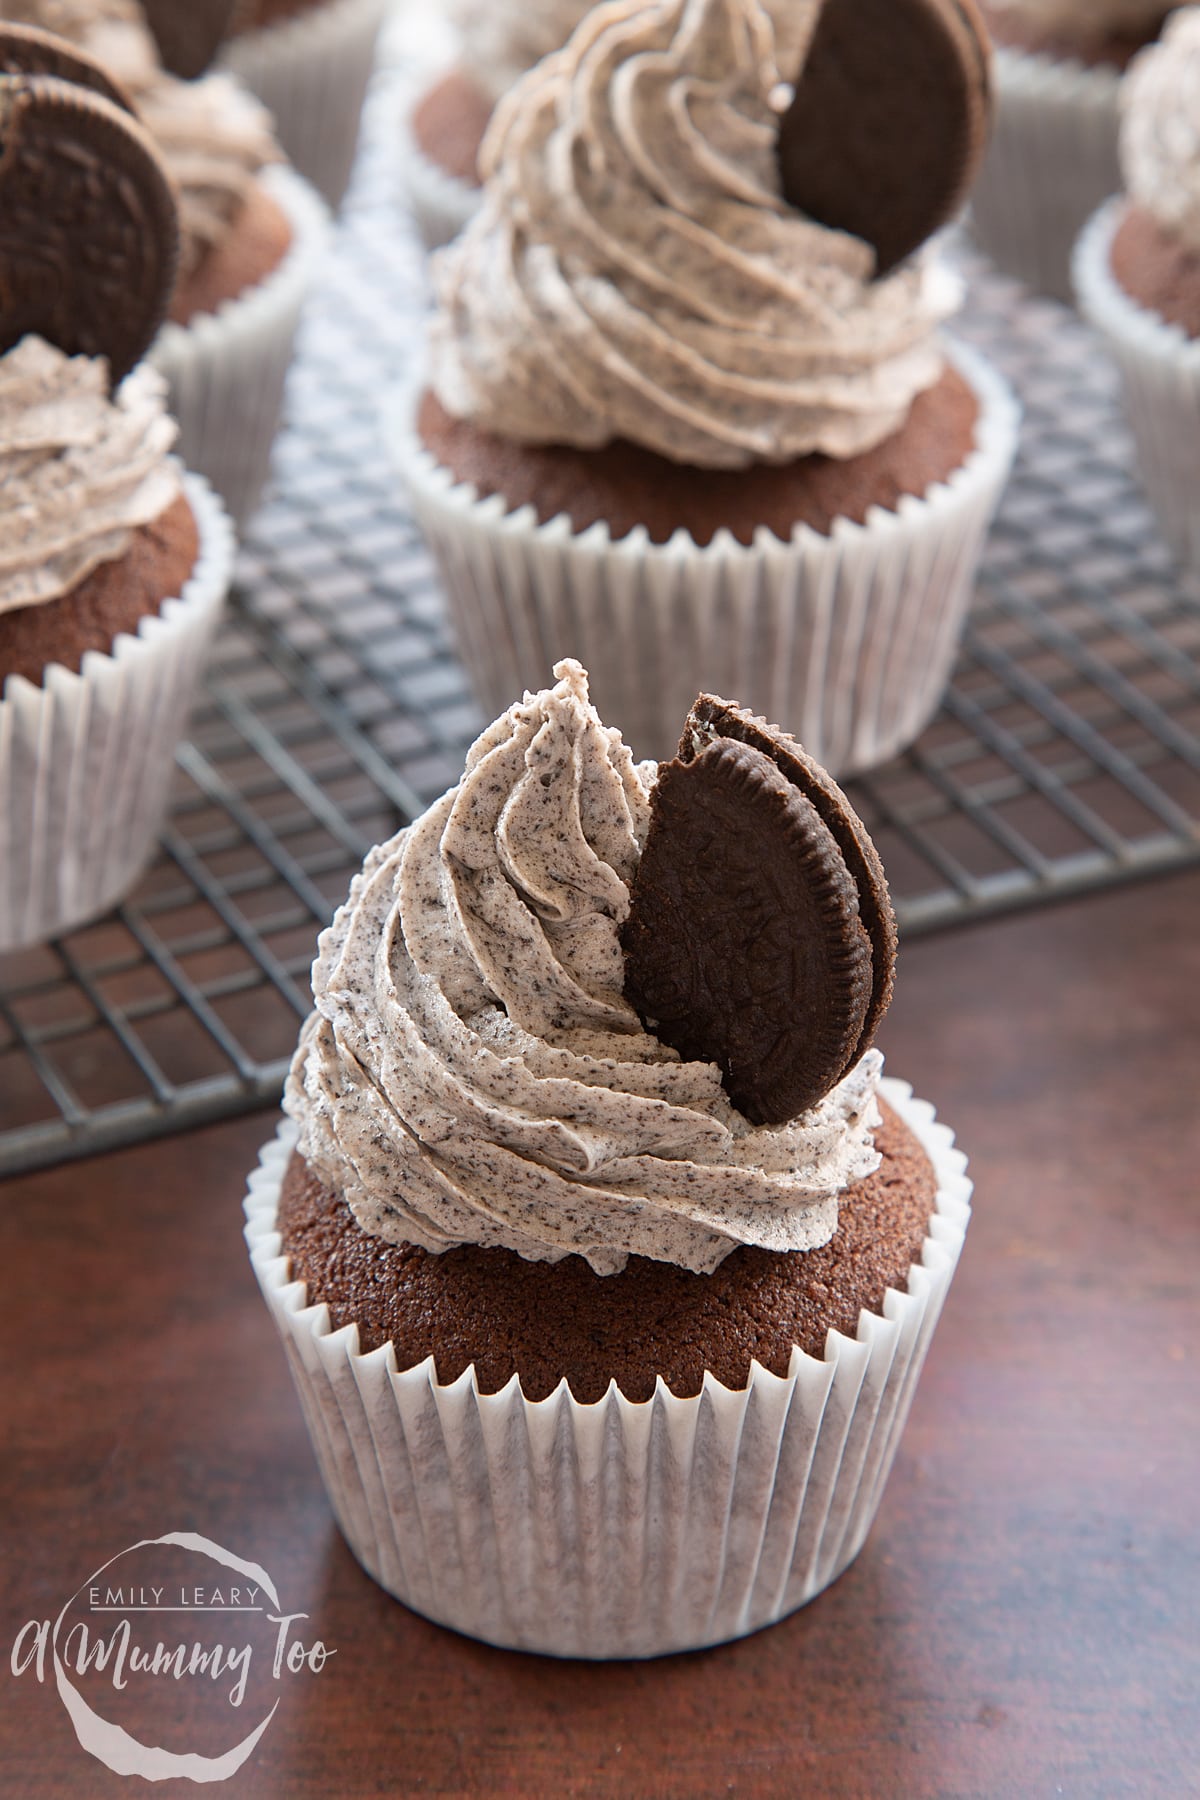 Front view shot of a chocolate cupcaked topped with oreo frosting and half an oreo on the side.